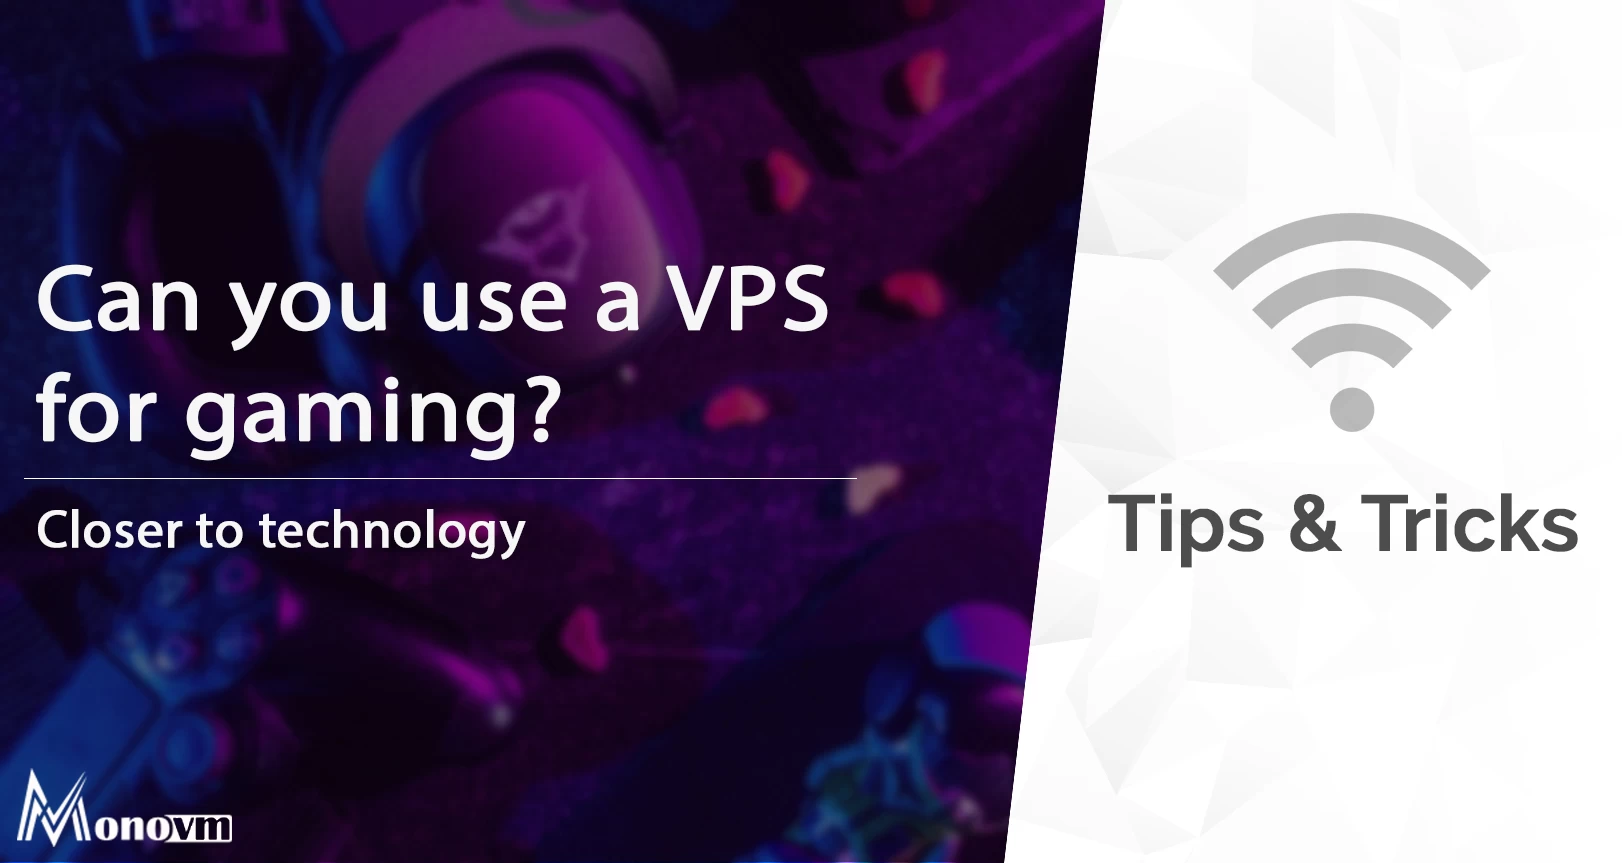 Can you use a VPS for gaming?